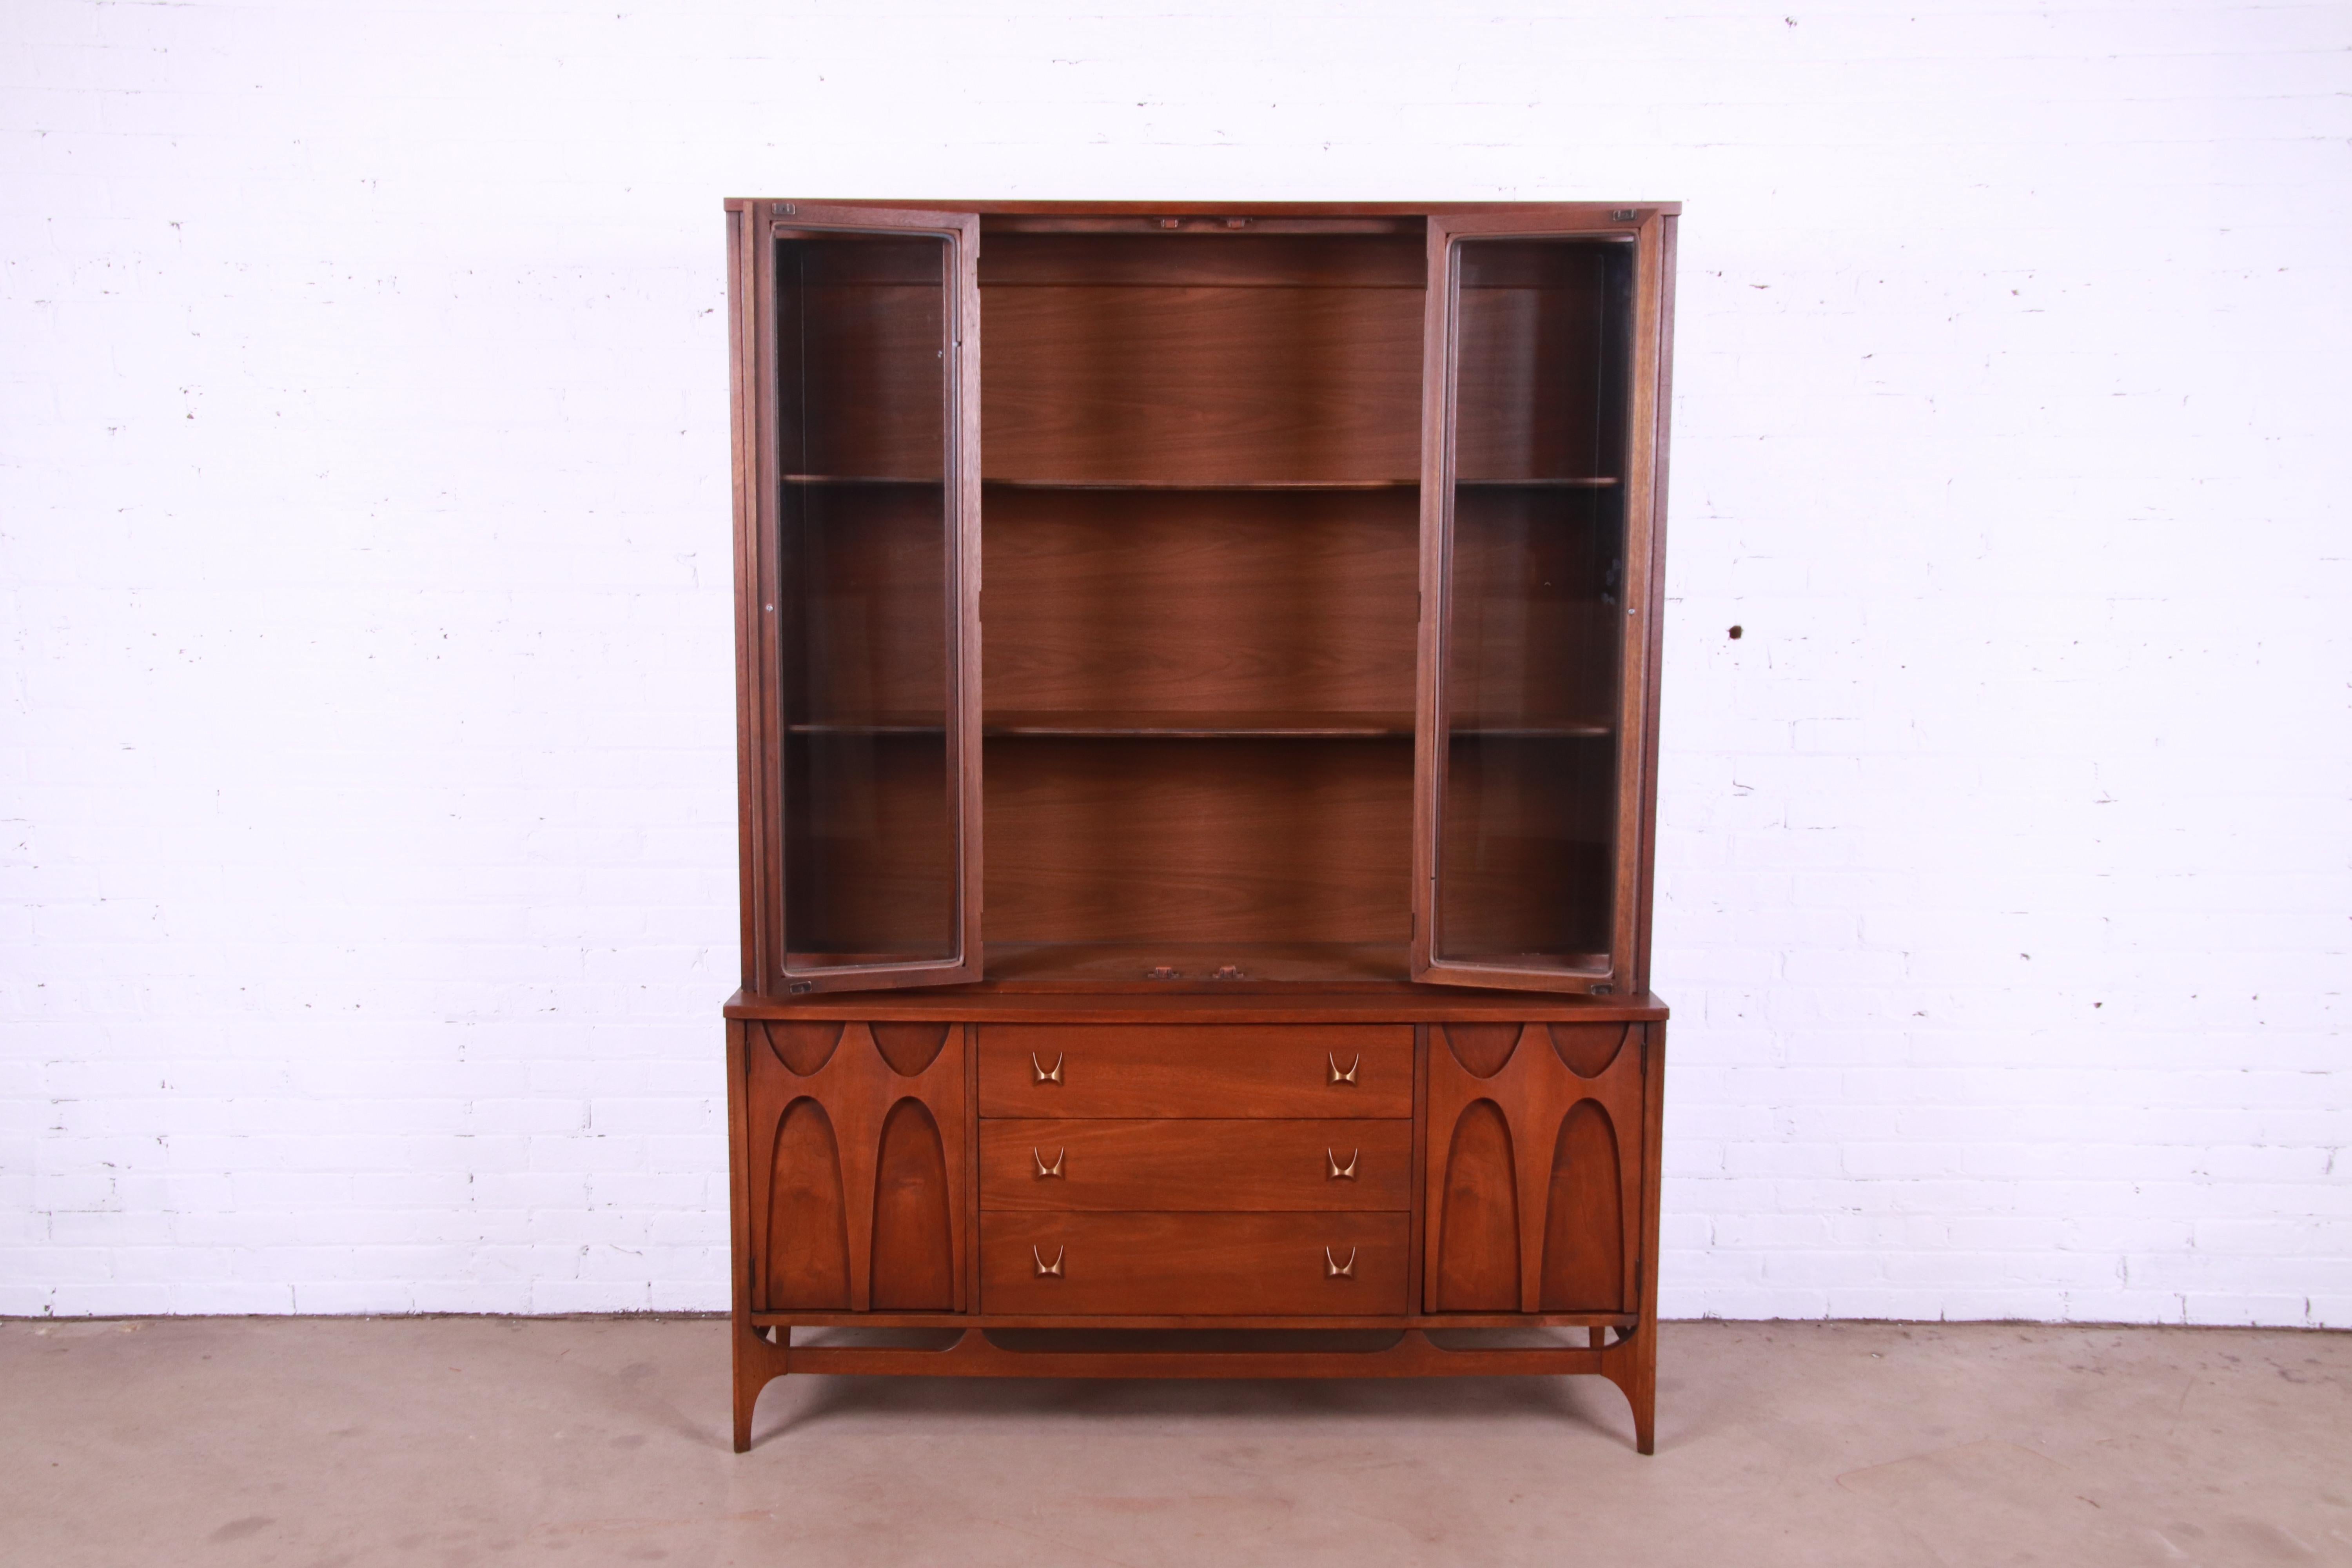 Mid-20th Century Broyhill Brasilia Sculpted Walnut Breakfront Bookcase or China Cabinet, 1960s